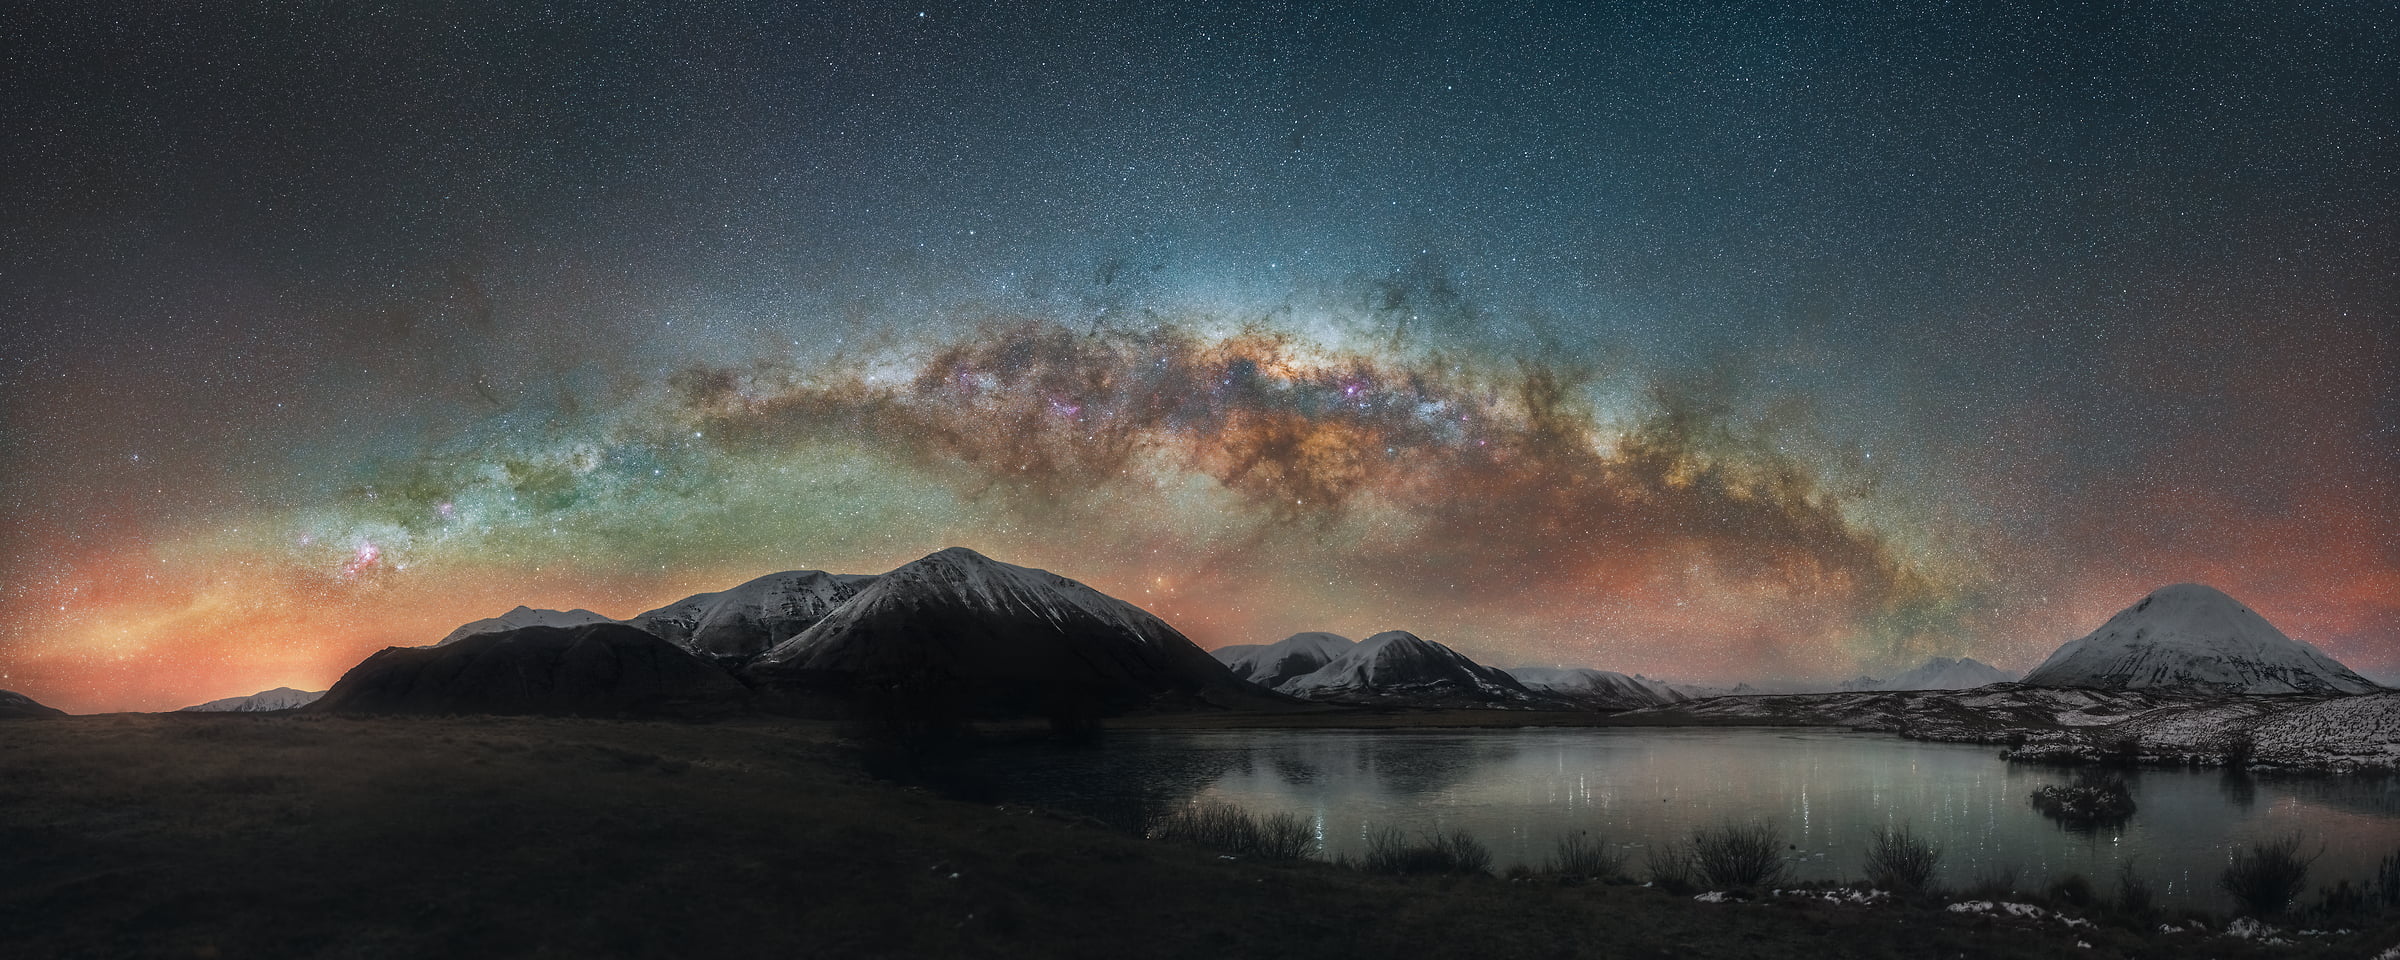 301 megapixels! A very high resolution, large-format VAST photo print of the night sky, milky way, and stars over mountains and a lake; fine art astrophotography landscape photo created by Paul Wilson in Lake Roundabout, New Zealand